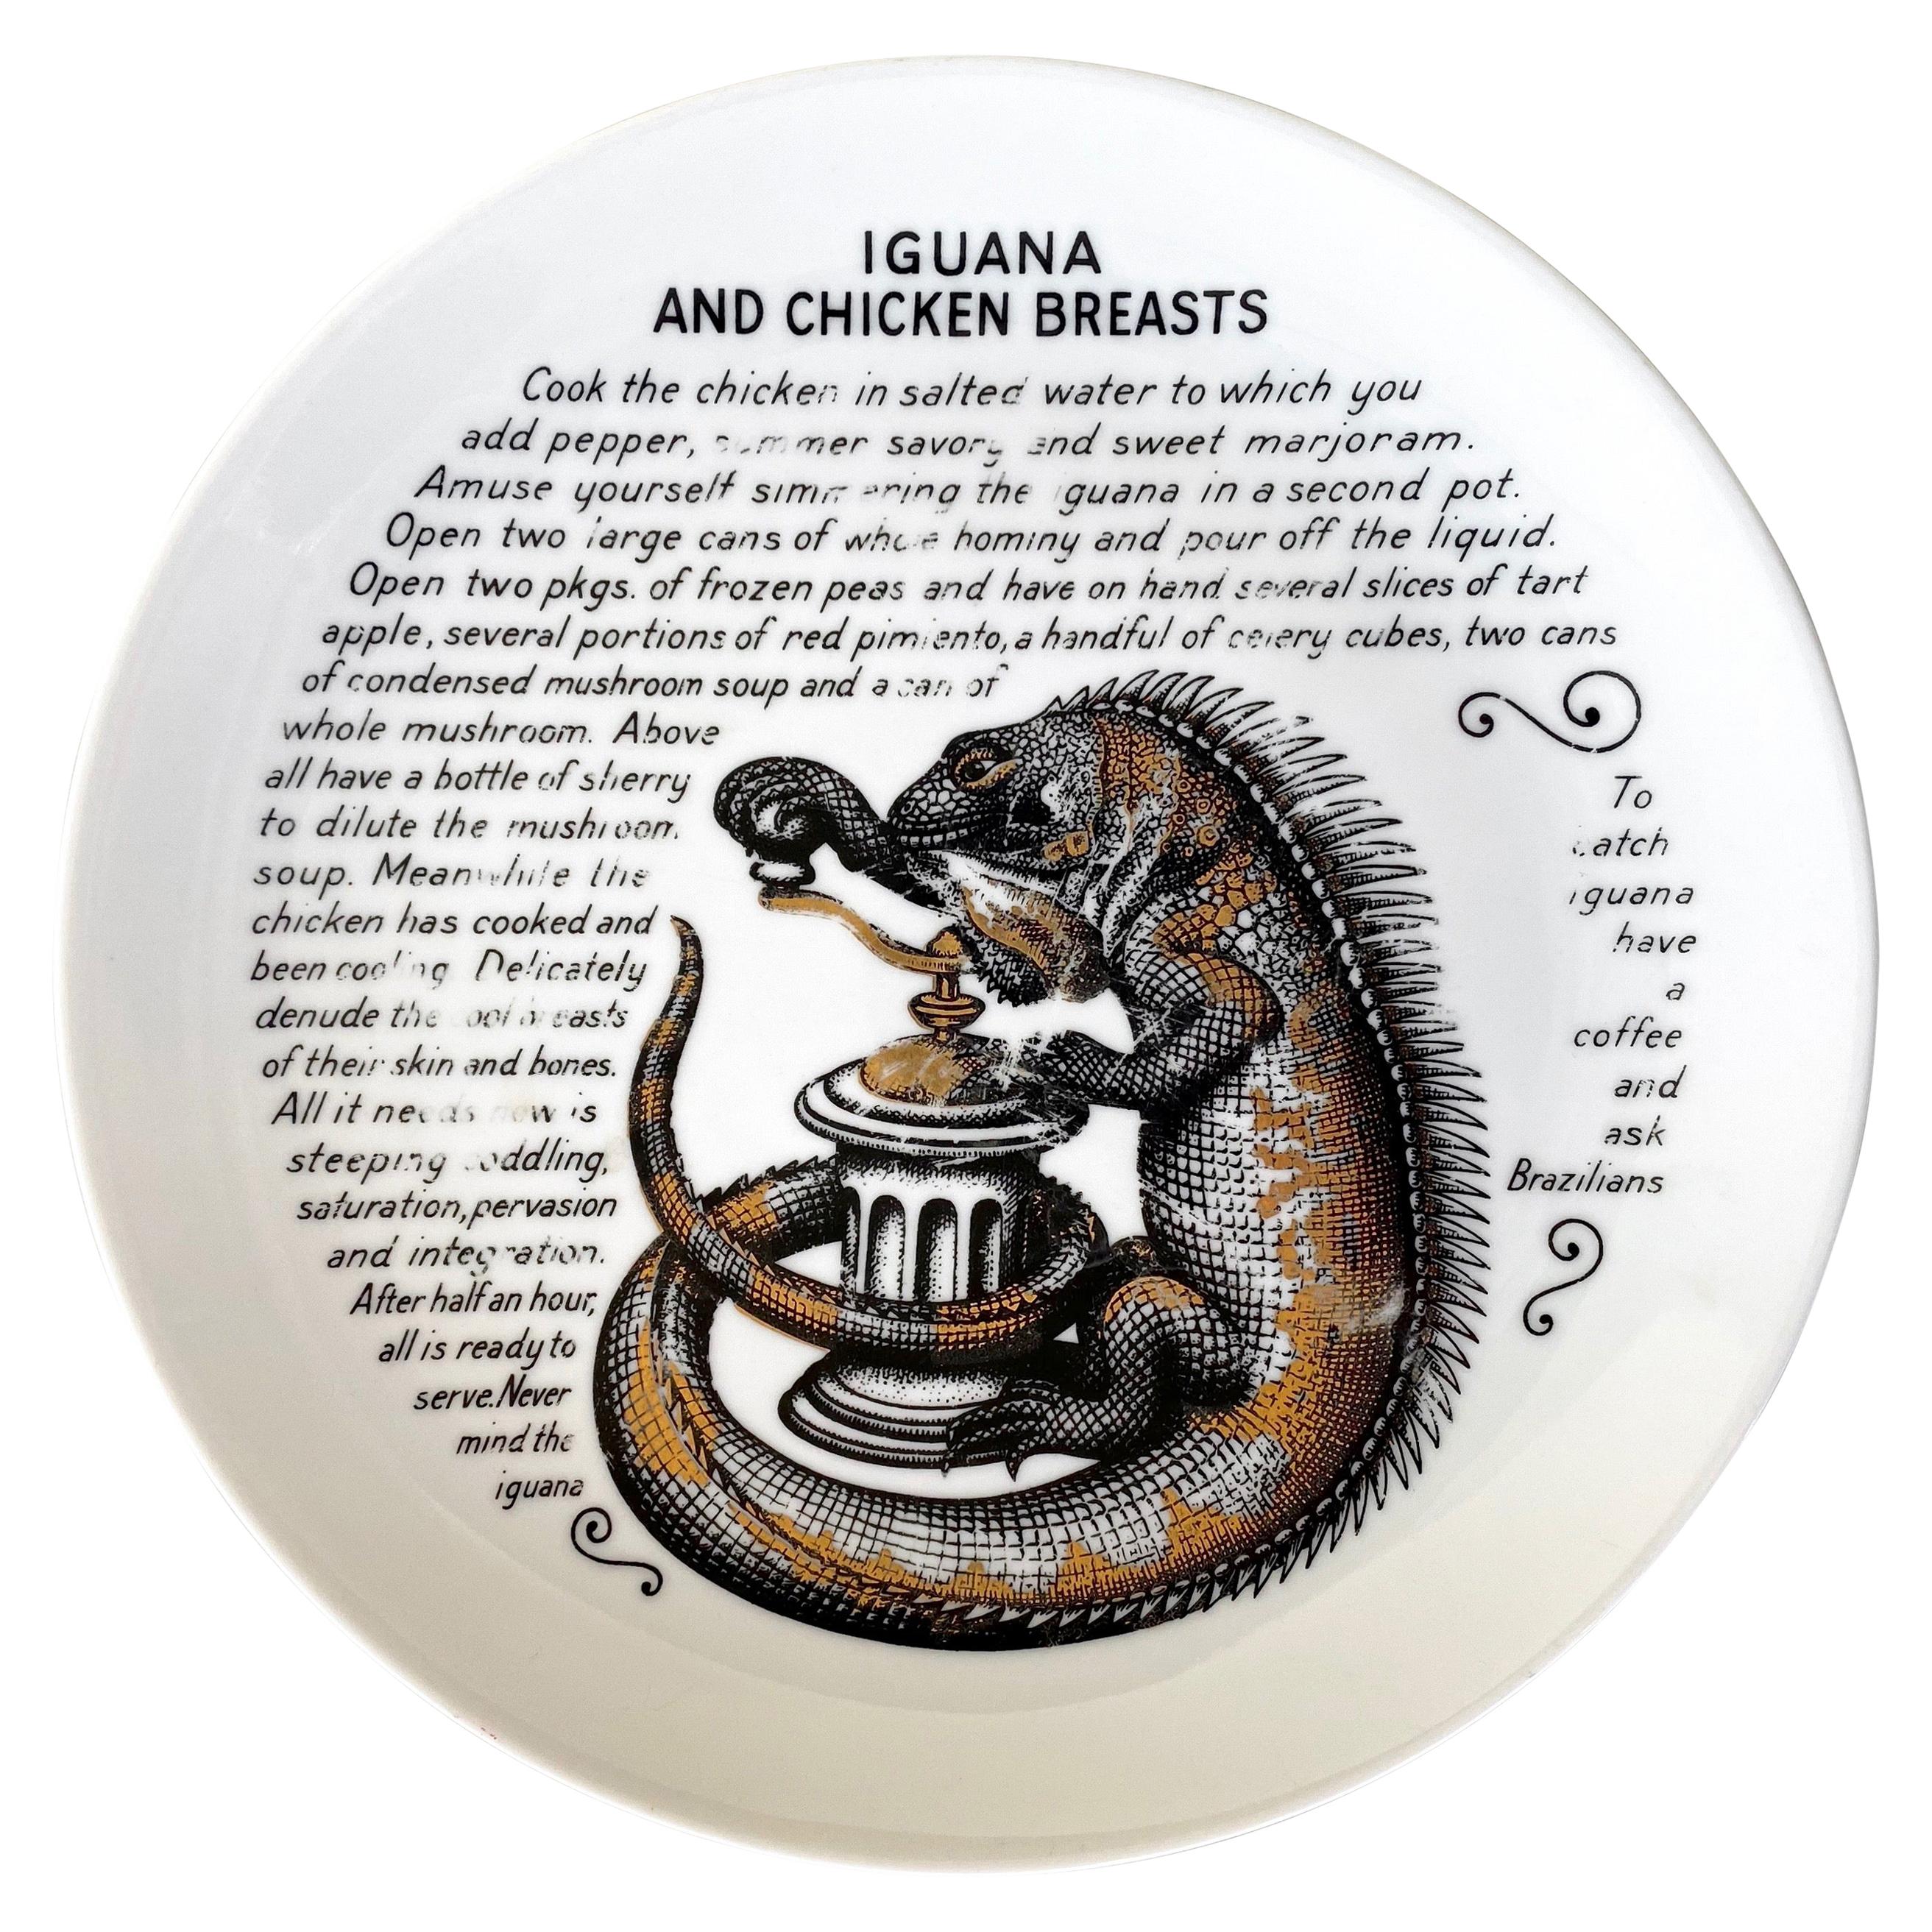 Fornasetti for Fleming Joffe “Iguana and Chicken Breasts” Recipe Plate, 1960s